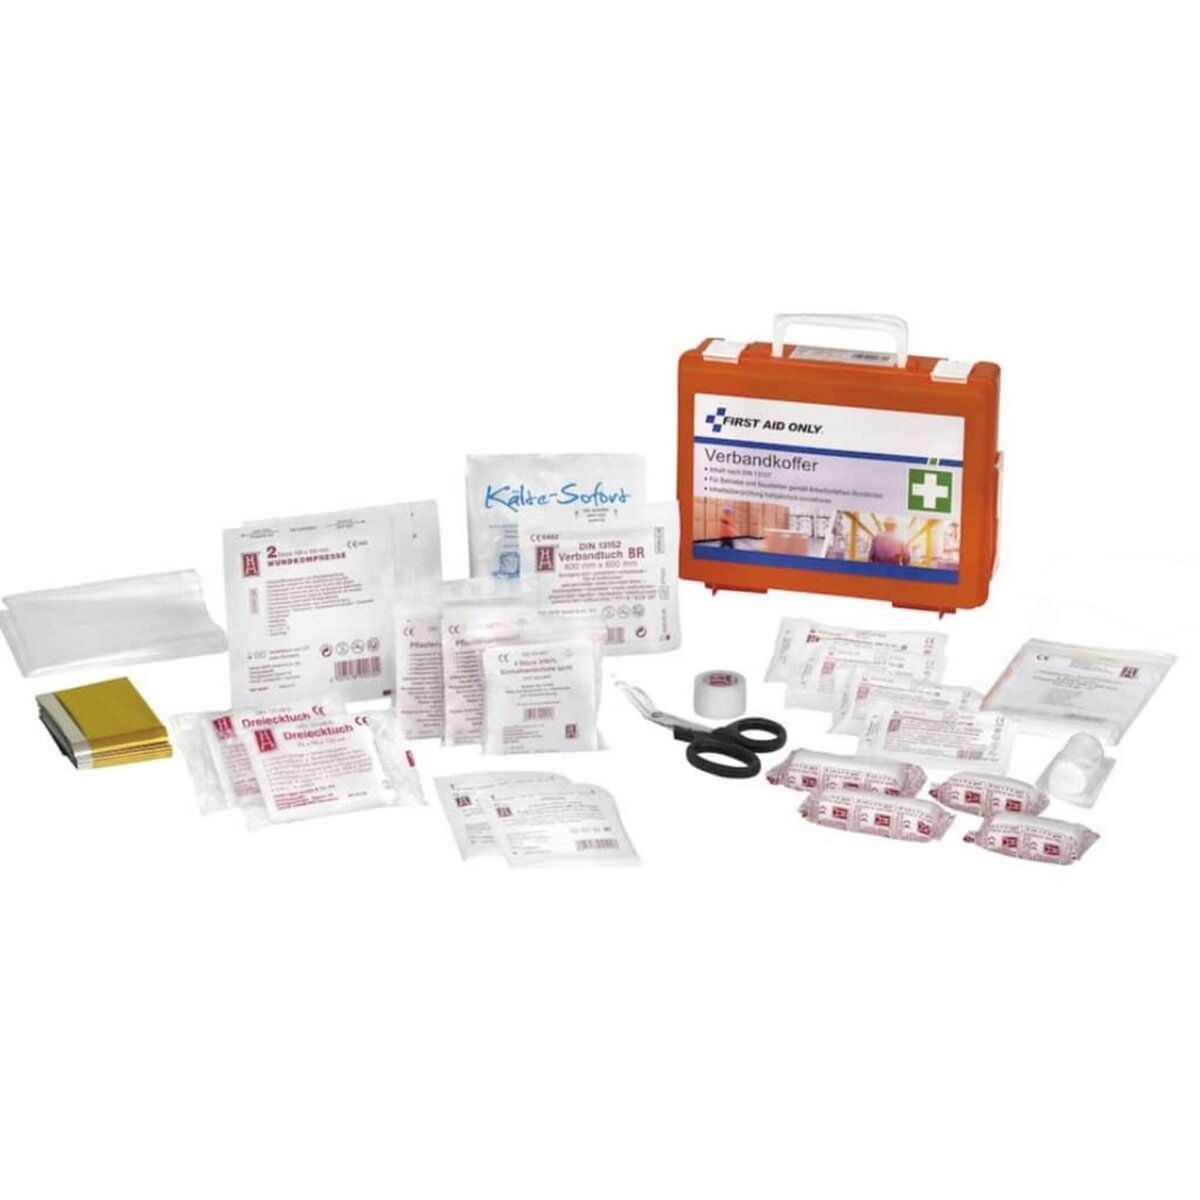 FIRST AID ONLY FIRST AID ONLY Set d'urgence d'entreprise avec poignee DIN 13157